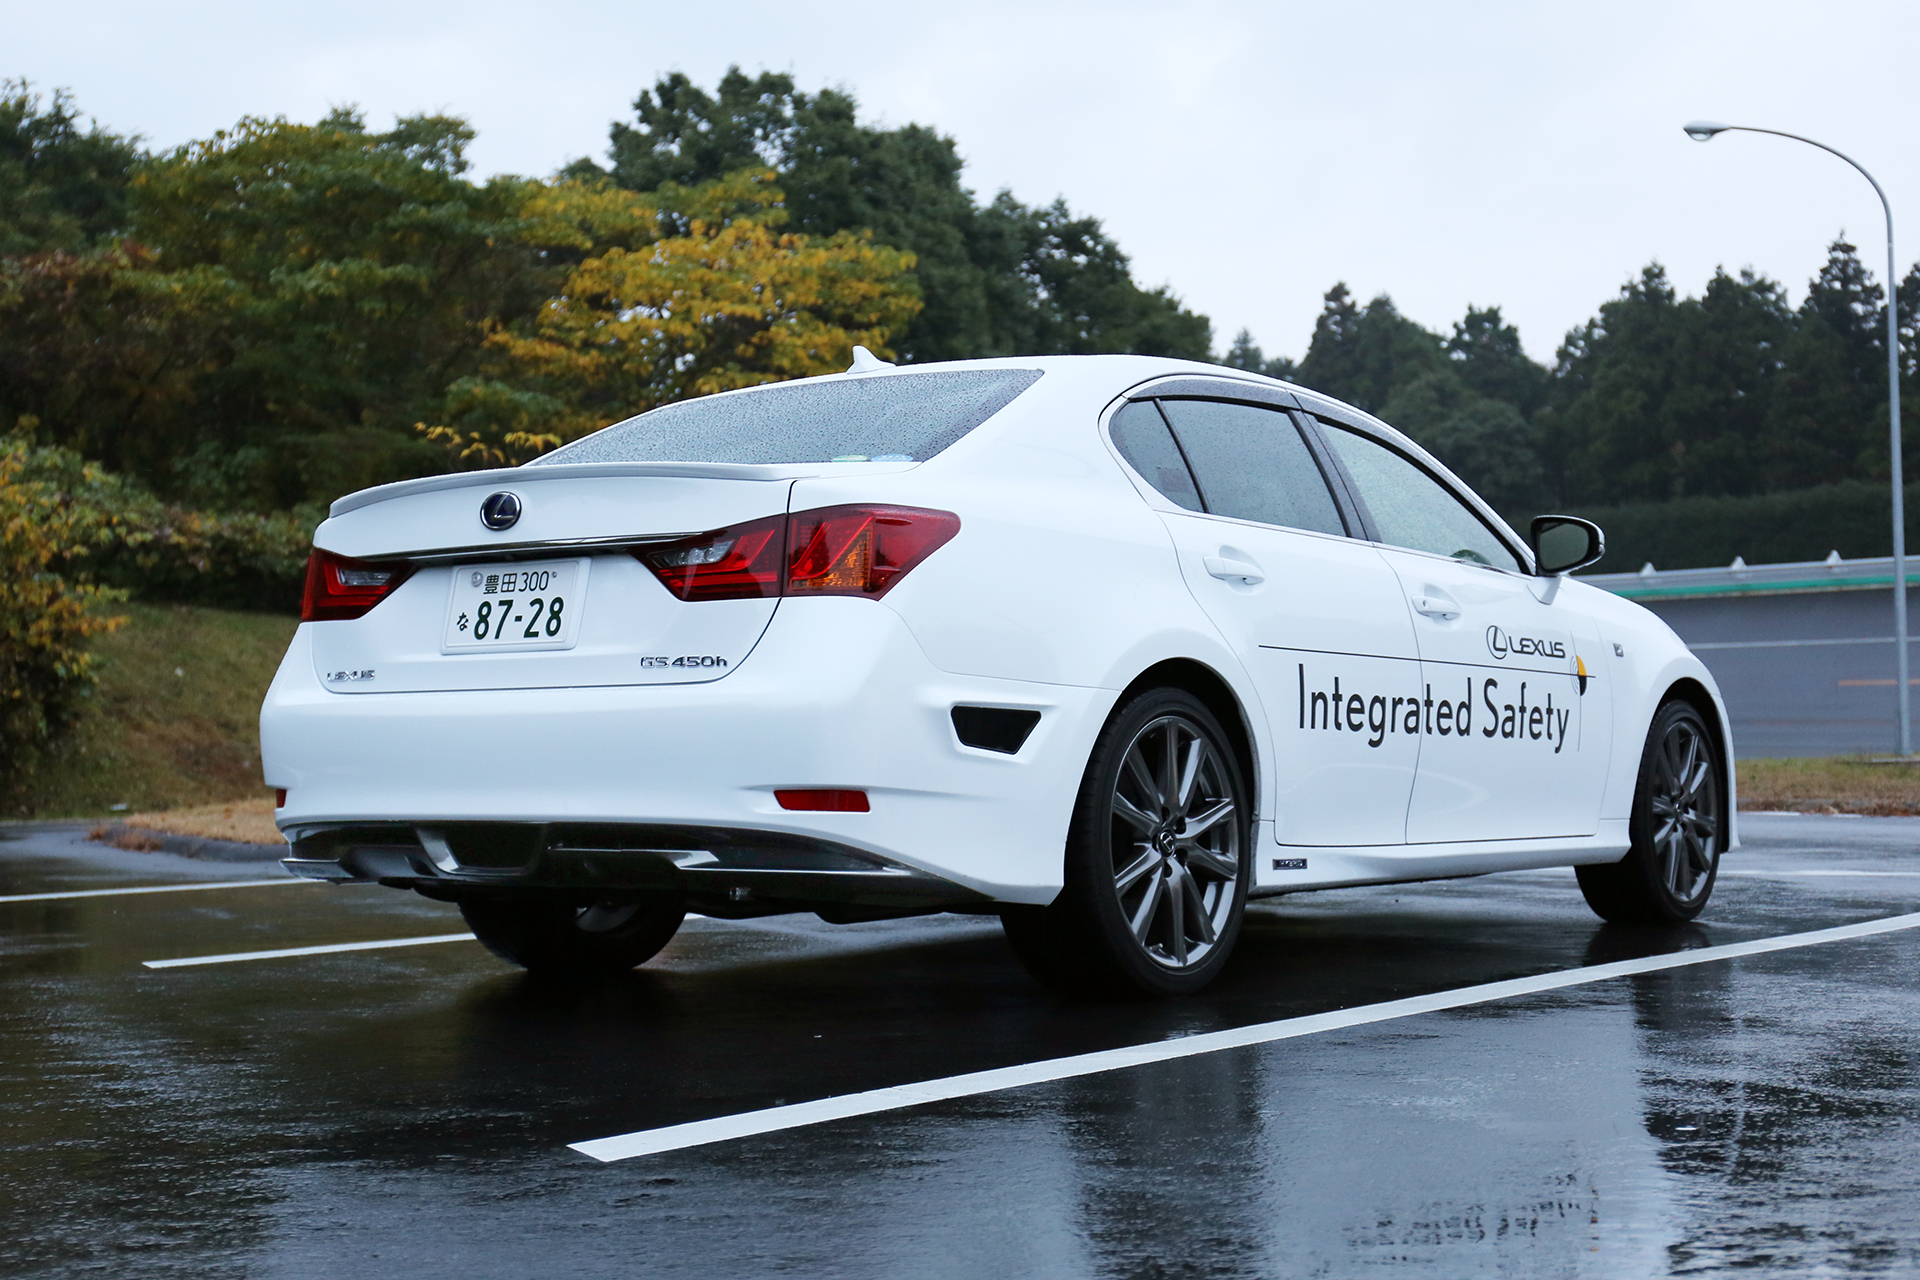 New Automated Highway Driving Technology Test Vehicle